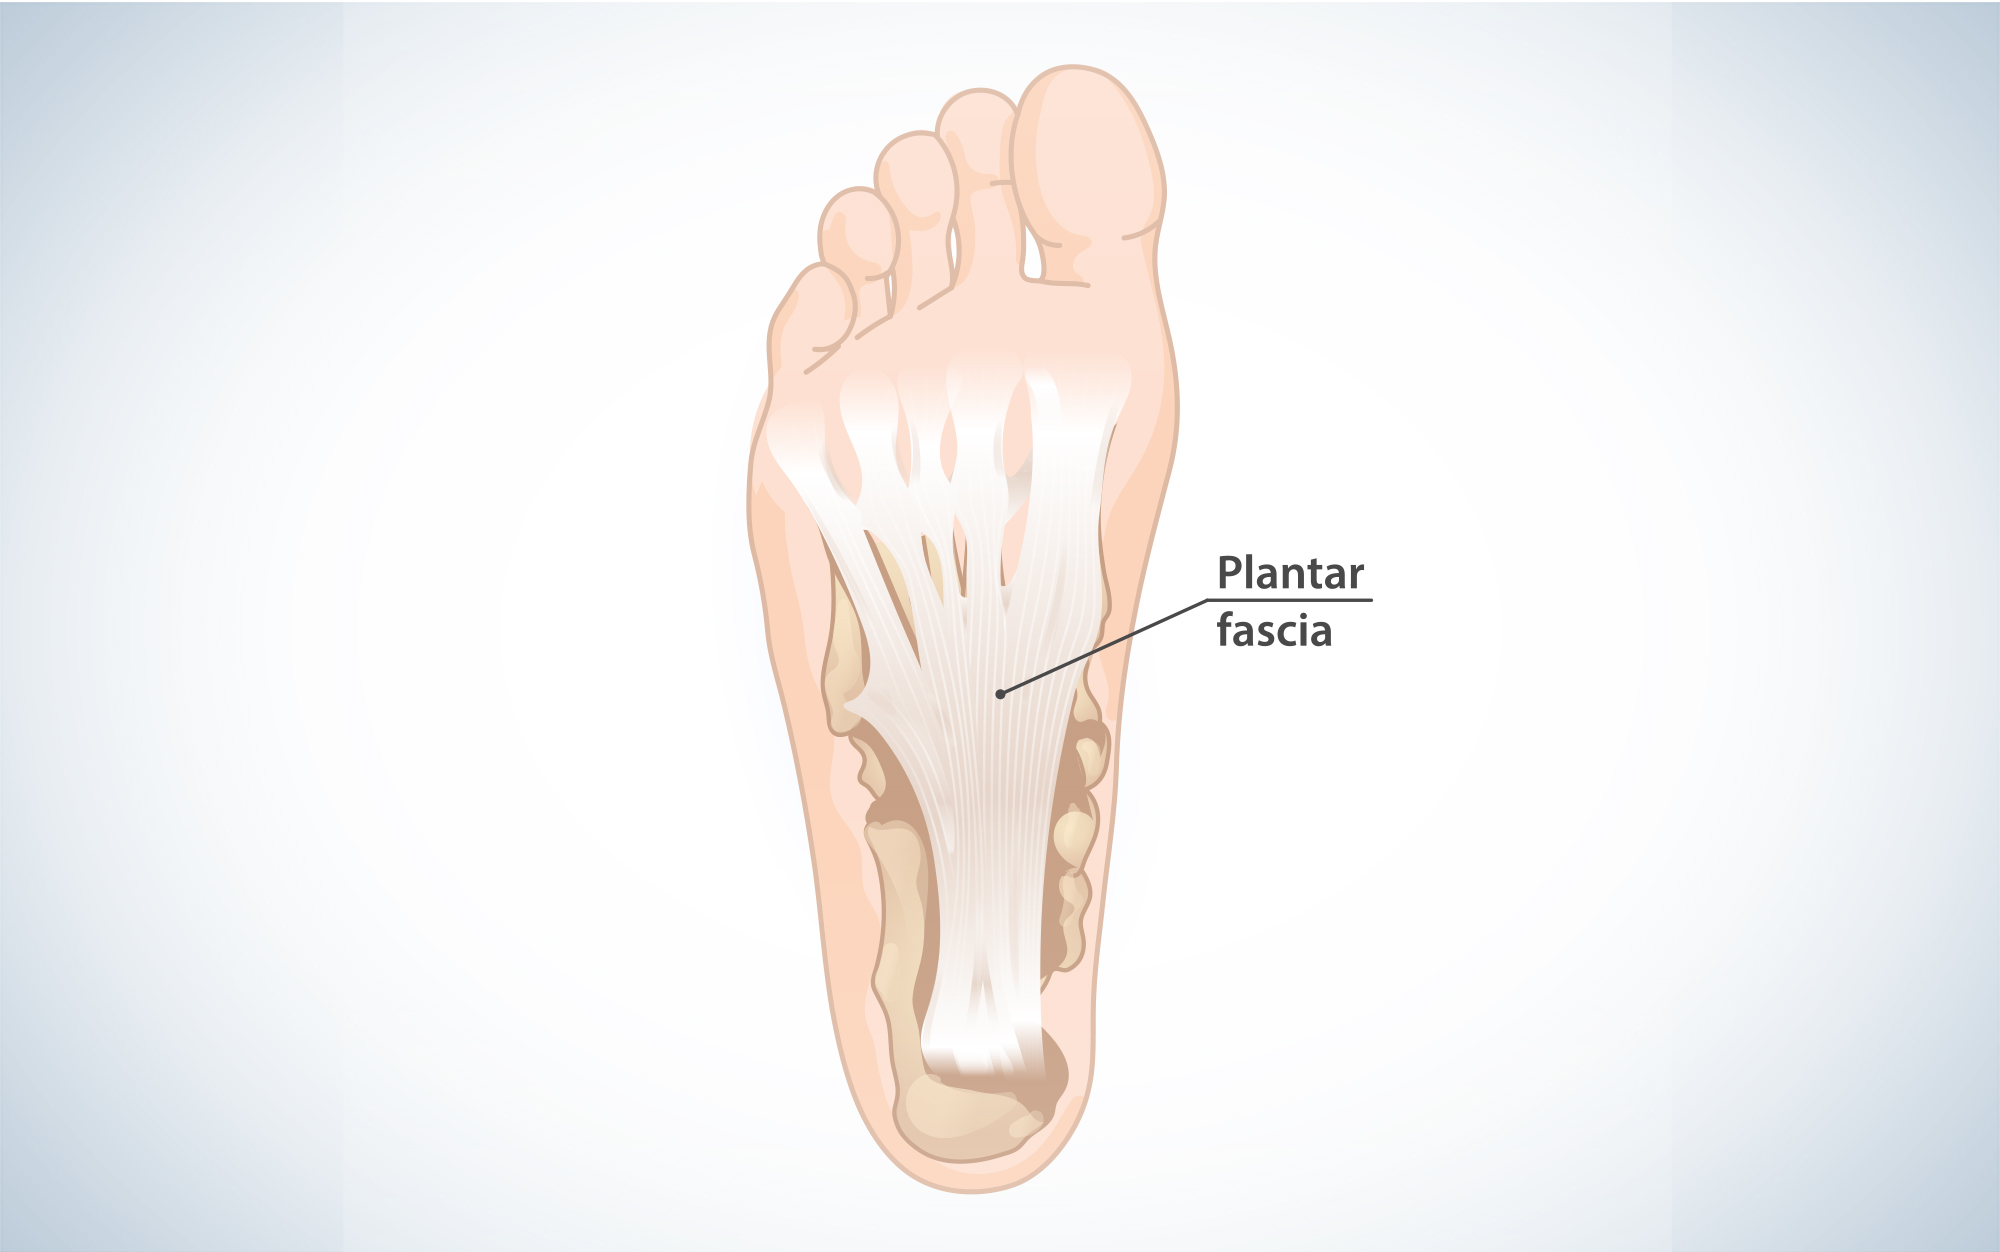 The plantar fascia is connective tissue that runs along the bottom of your foot from the heel bone to the toes.